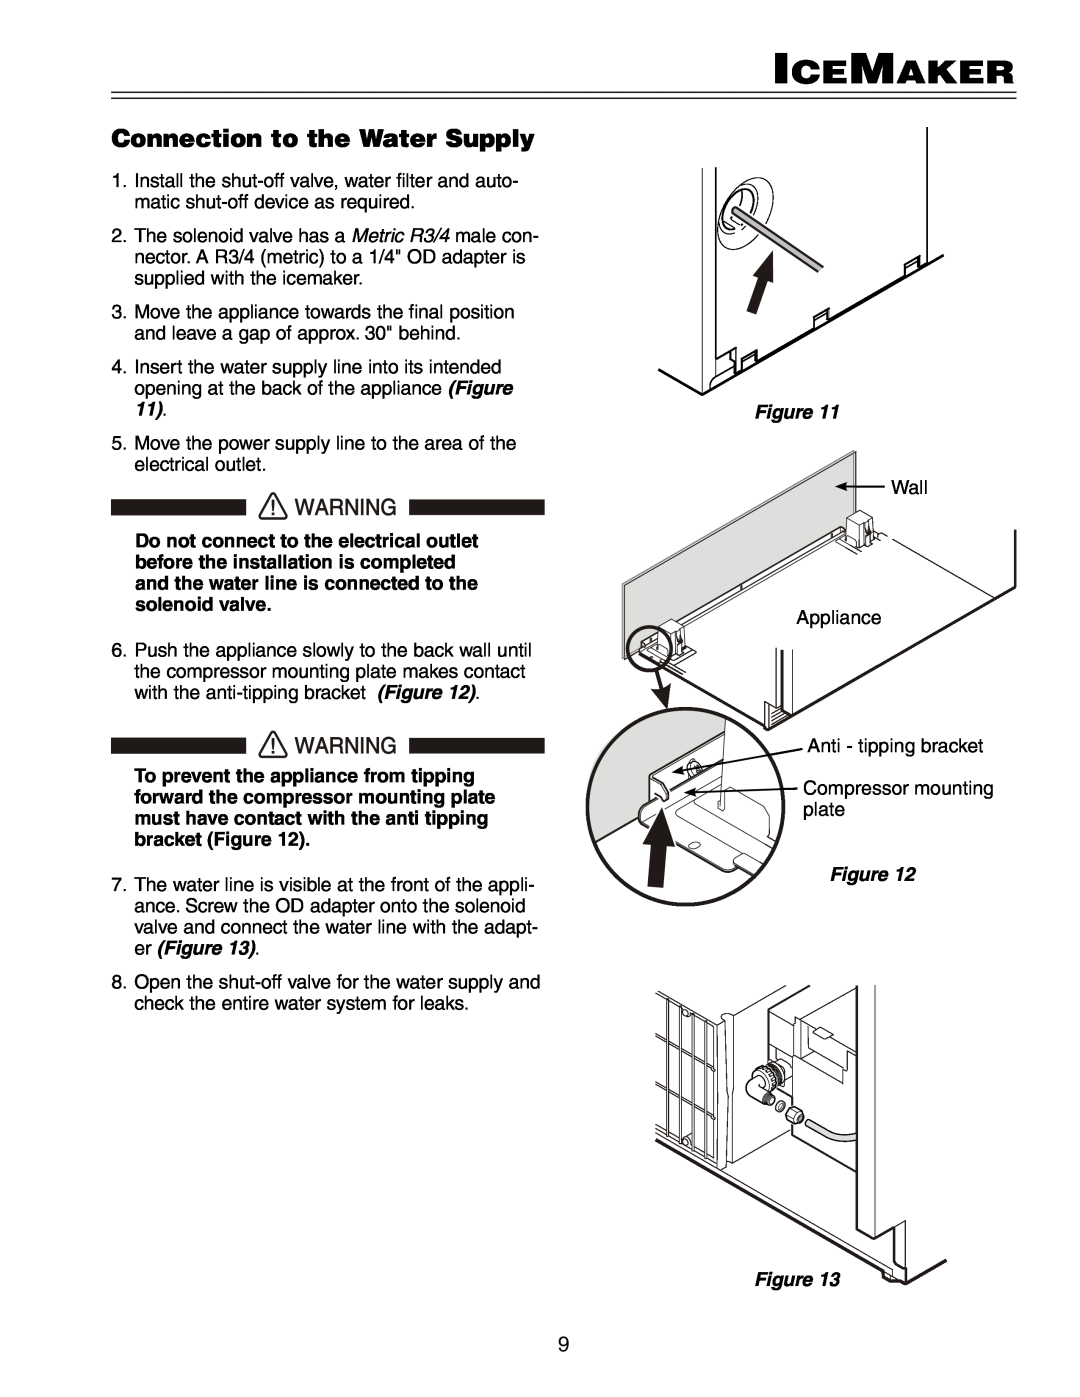 Liebherr HCS 20 installation instructions Connection to the Water Supply, Icemaker 